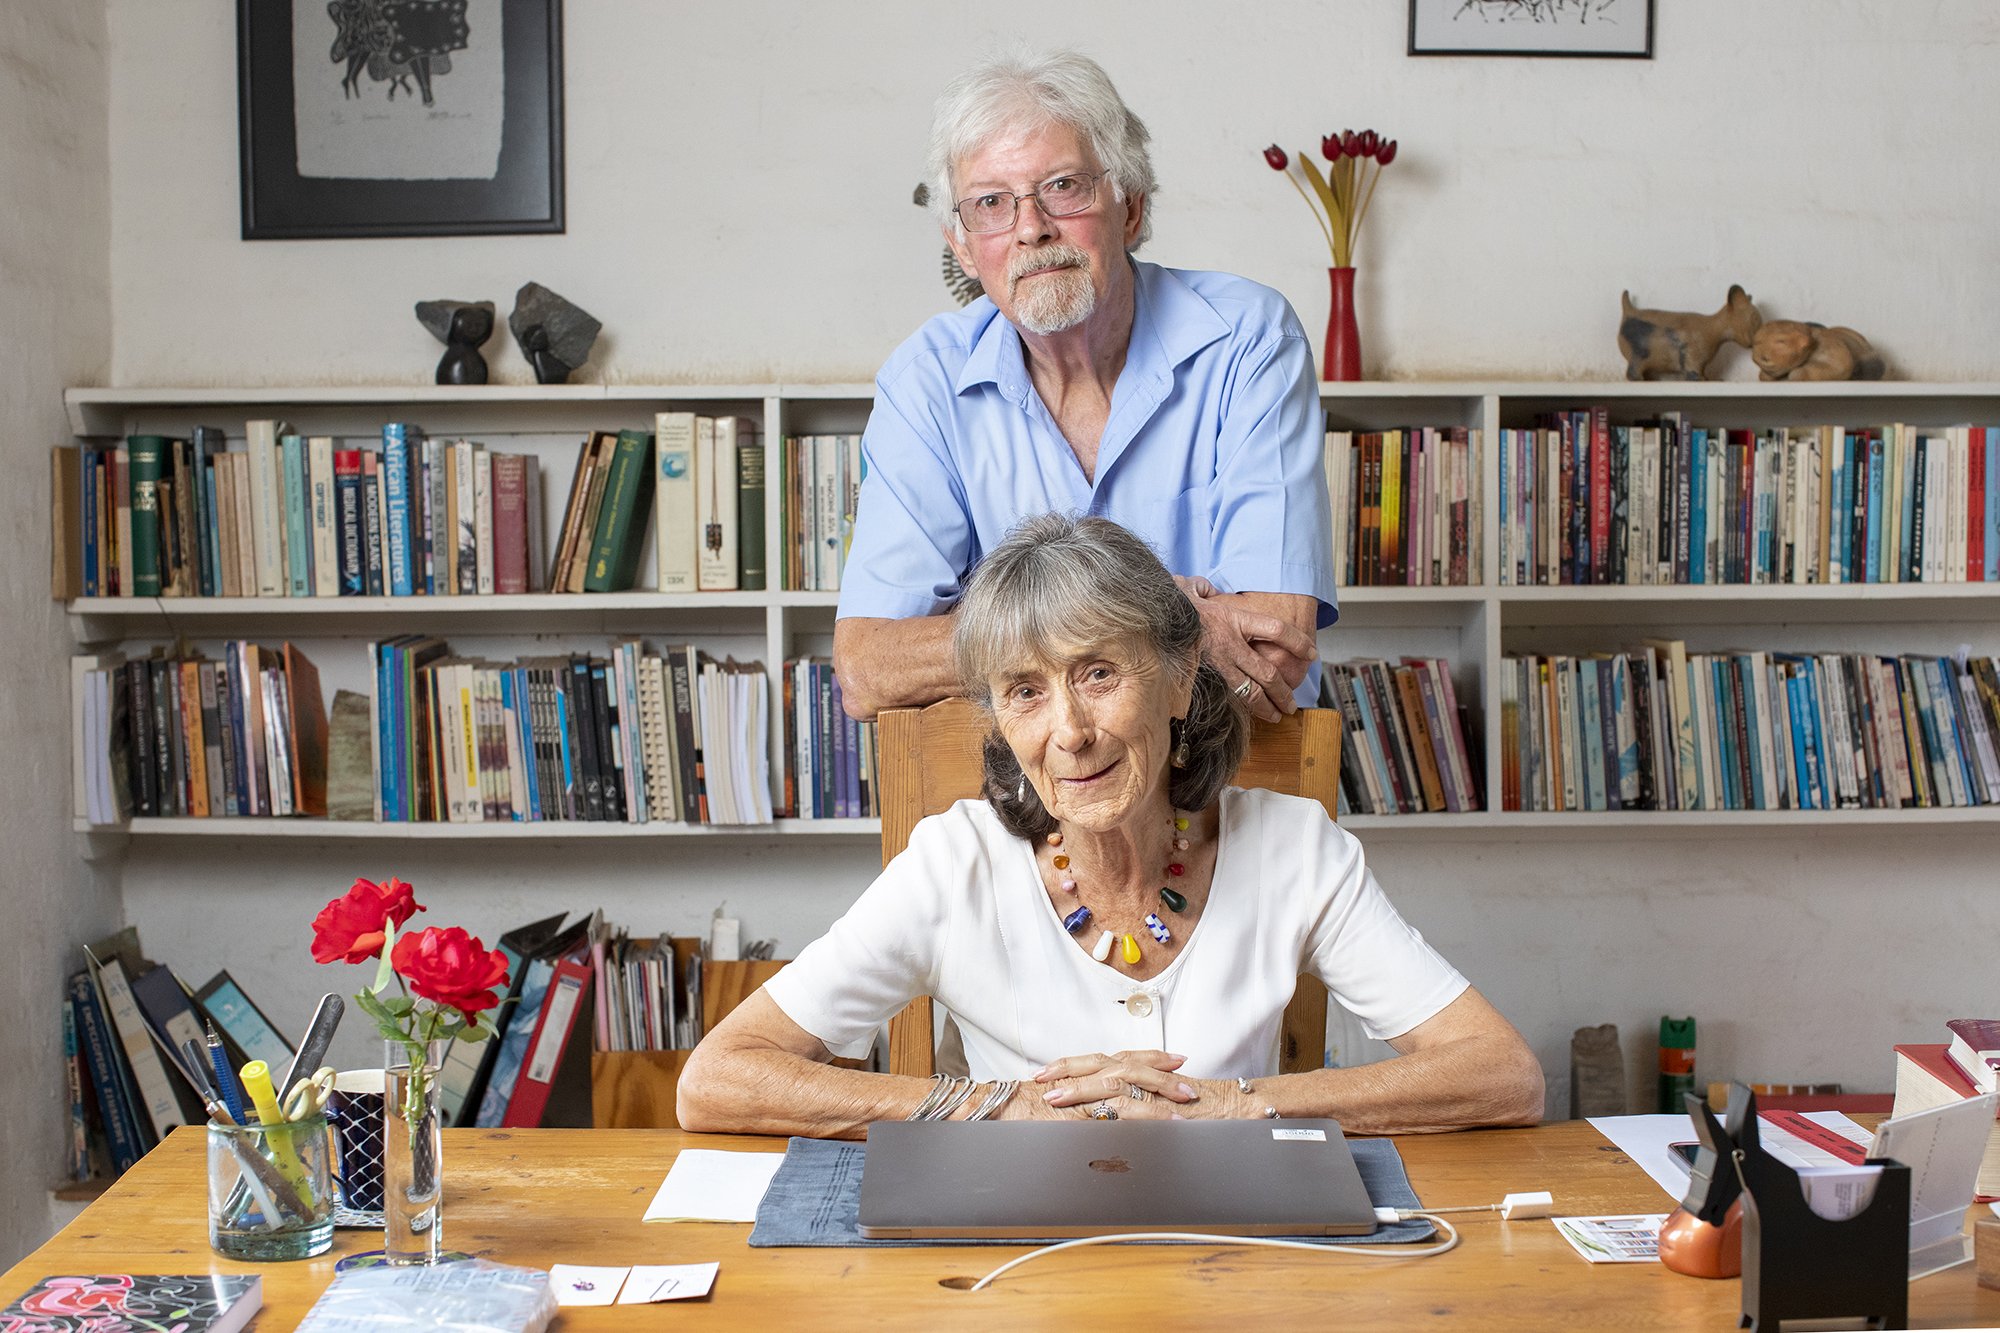  The founders of Weaver Press, Irene Staunton and Murray McCartney, at their home in Harare. -  For The Guardian  